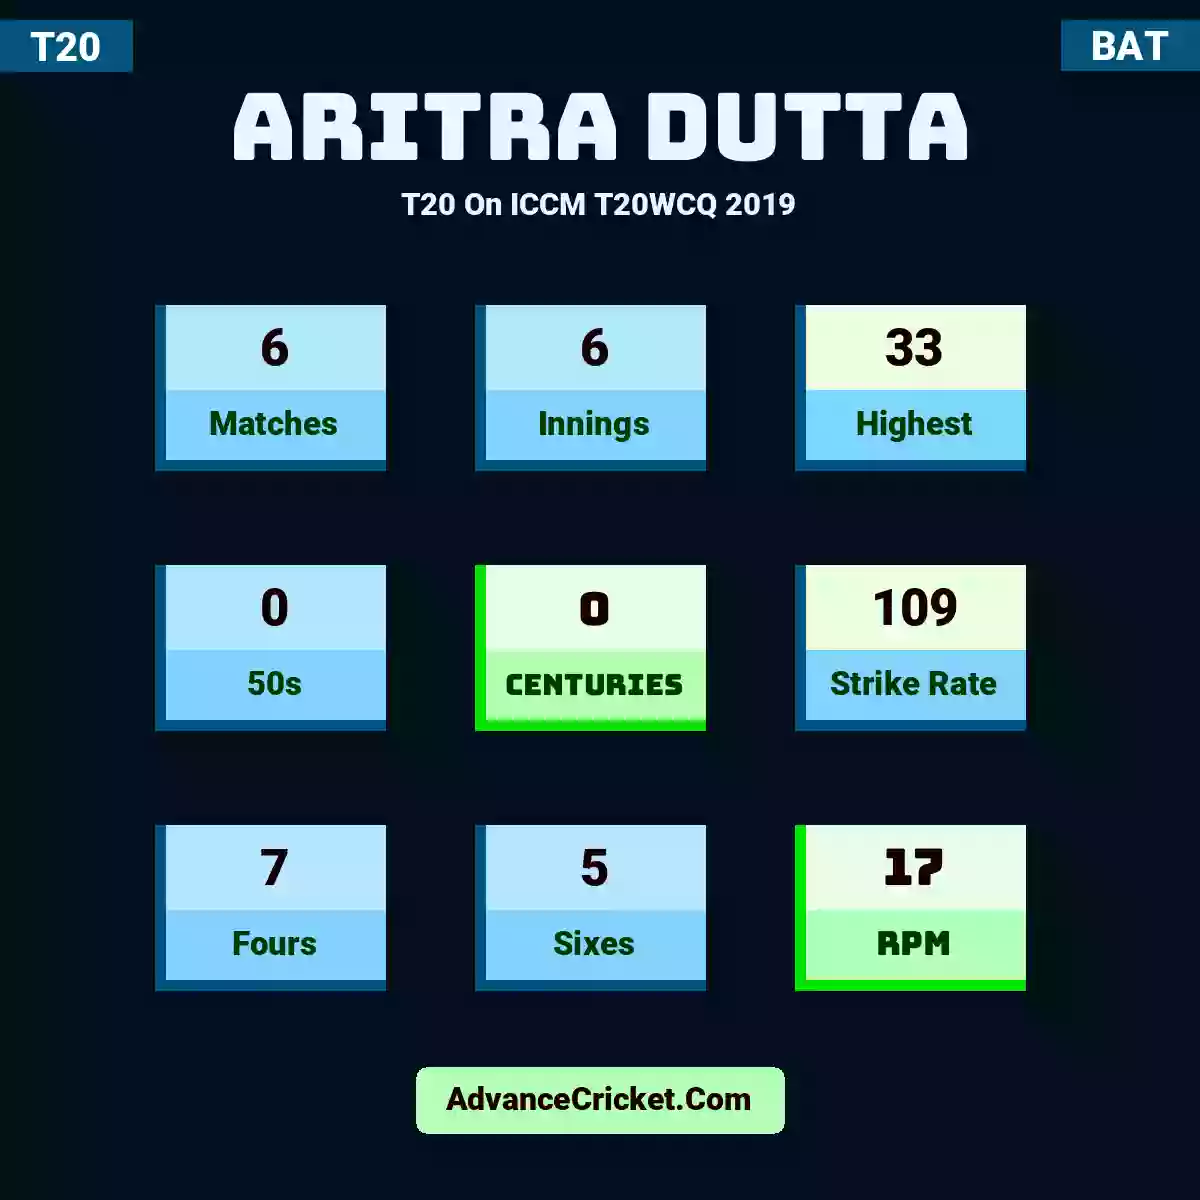 Aritra Dutta T20  On ICCM T20WCQ 2019, Aritra Dutta played 6 matches, scored 33 runs as highest, 0 half-centuries, and 0 centuries, with a strike rate of 109. A.Dutta hit 7 fours and 5 sixes, with an RPM of 17.